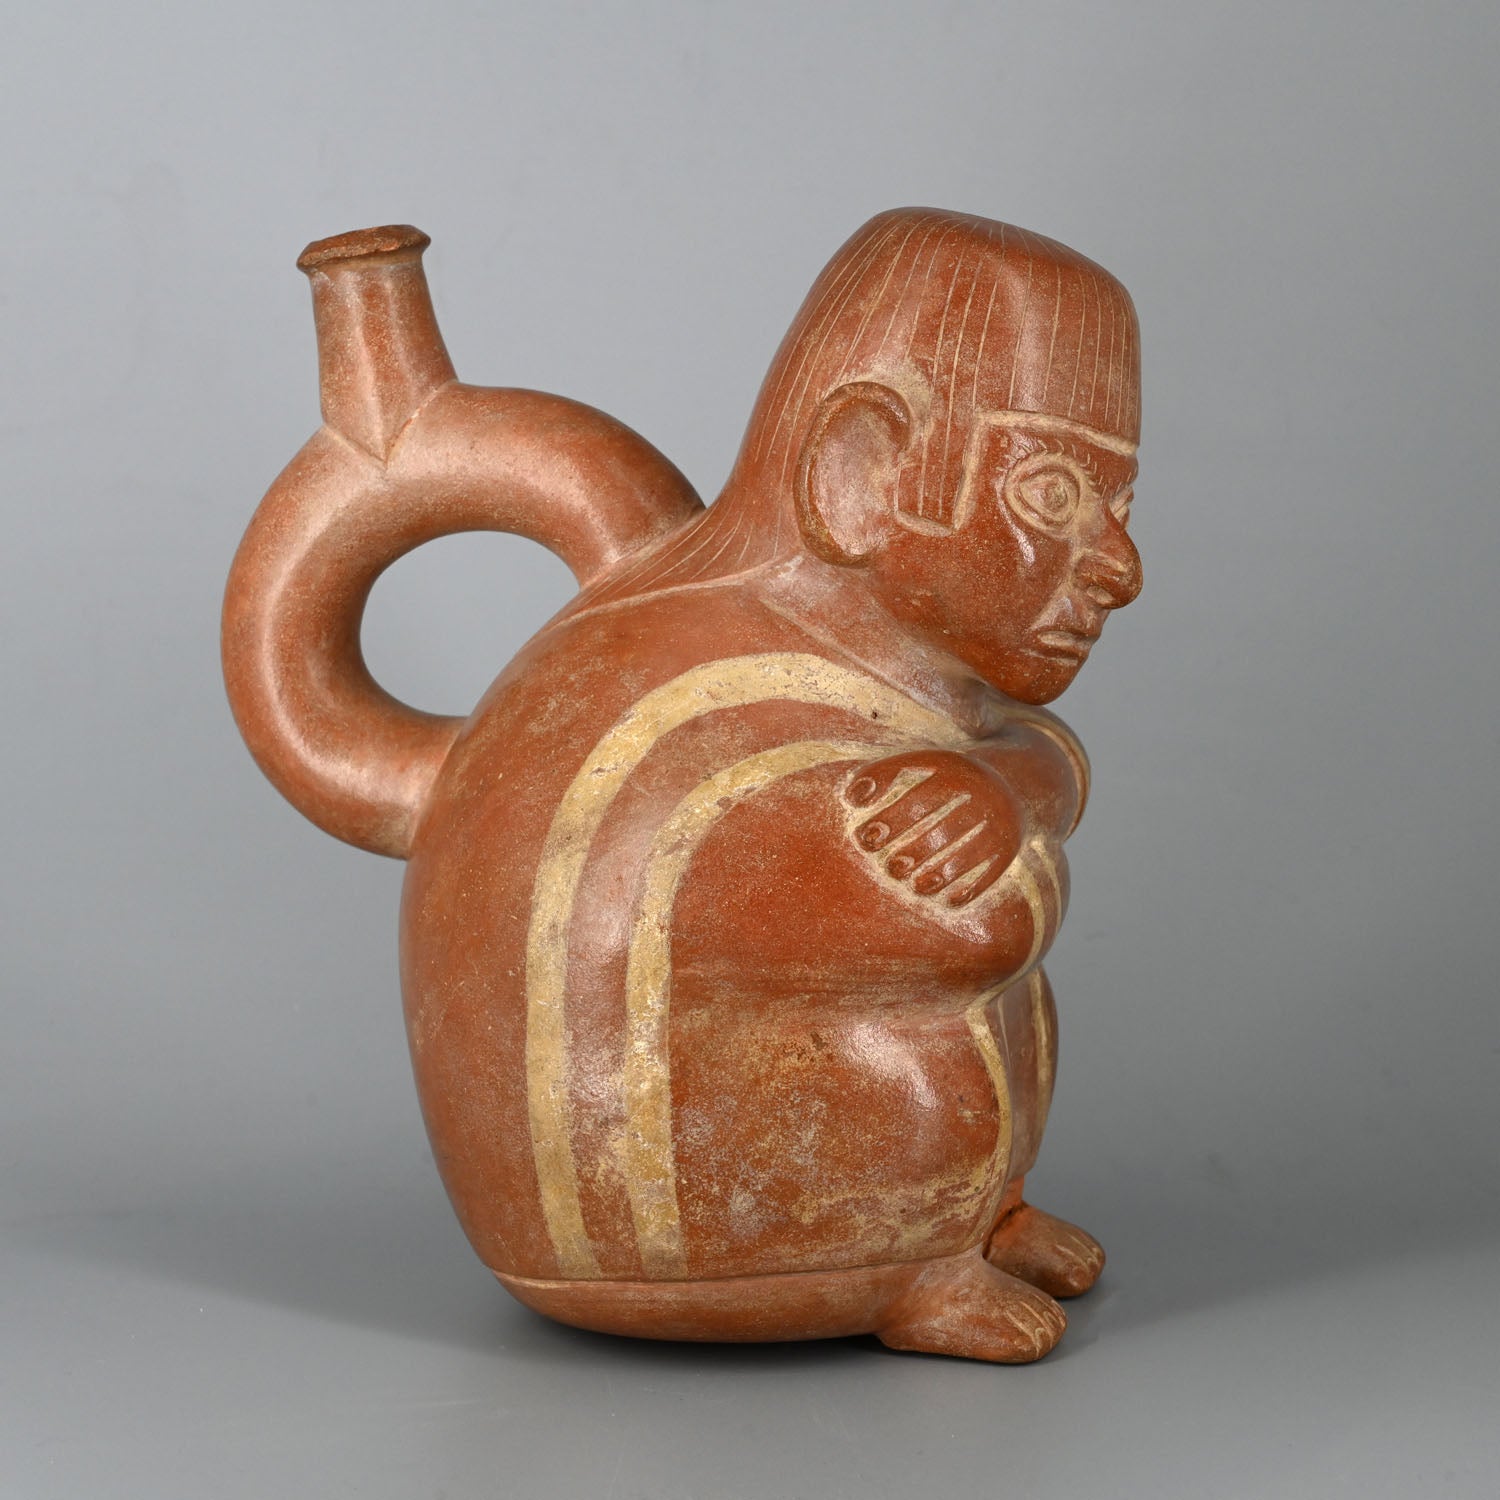 A Moche Stirrup Bottle with a Seated Man, ca. 200 - 400 CE